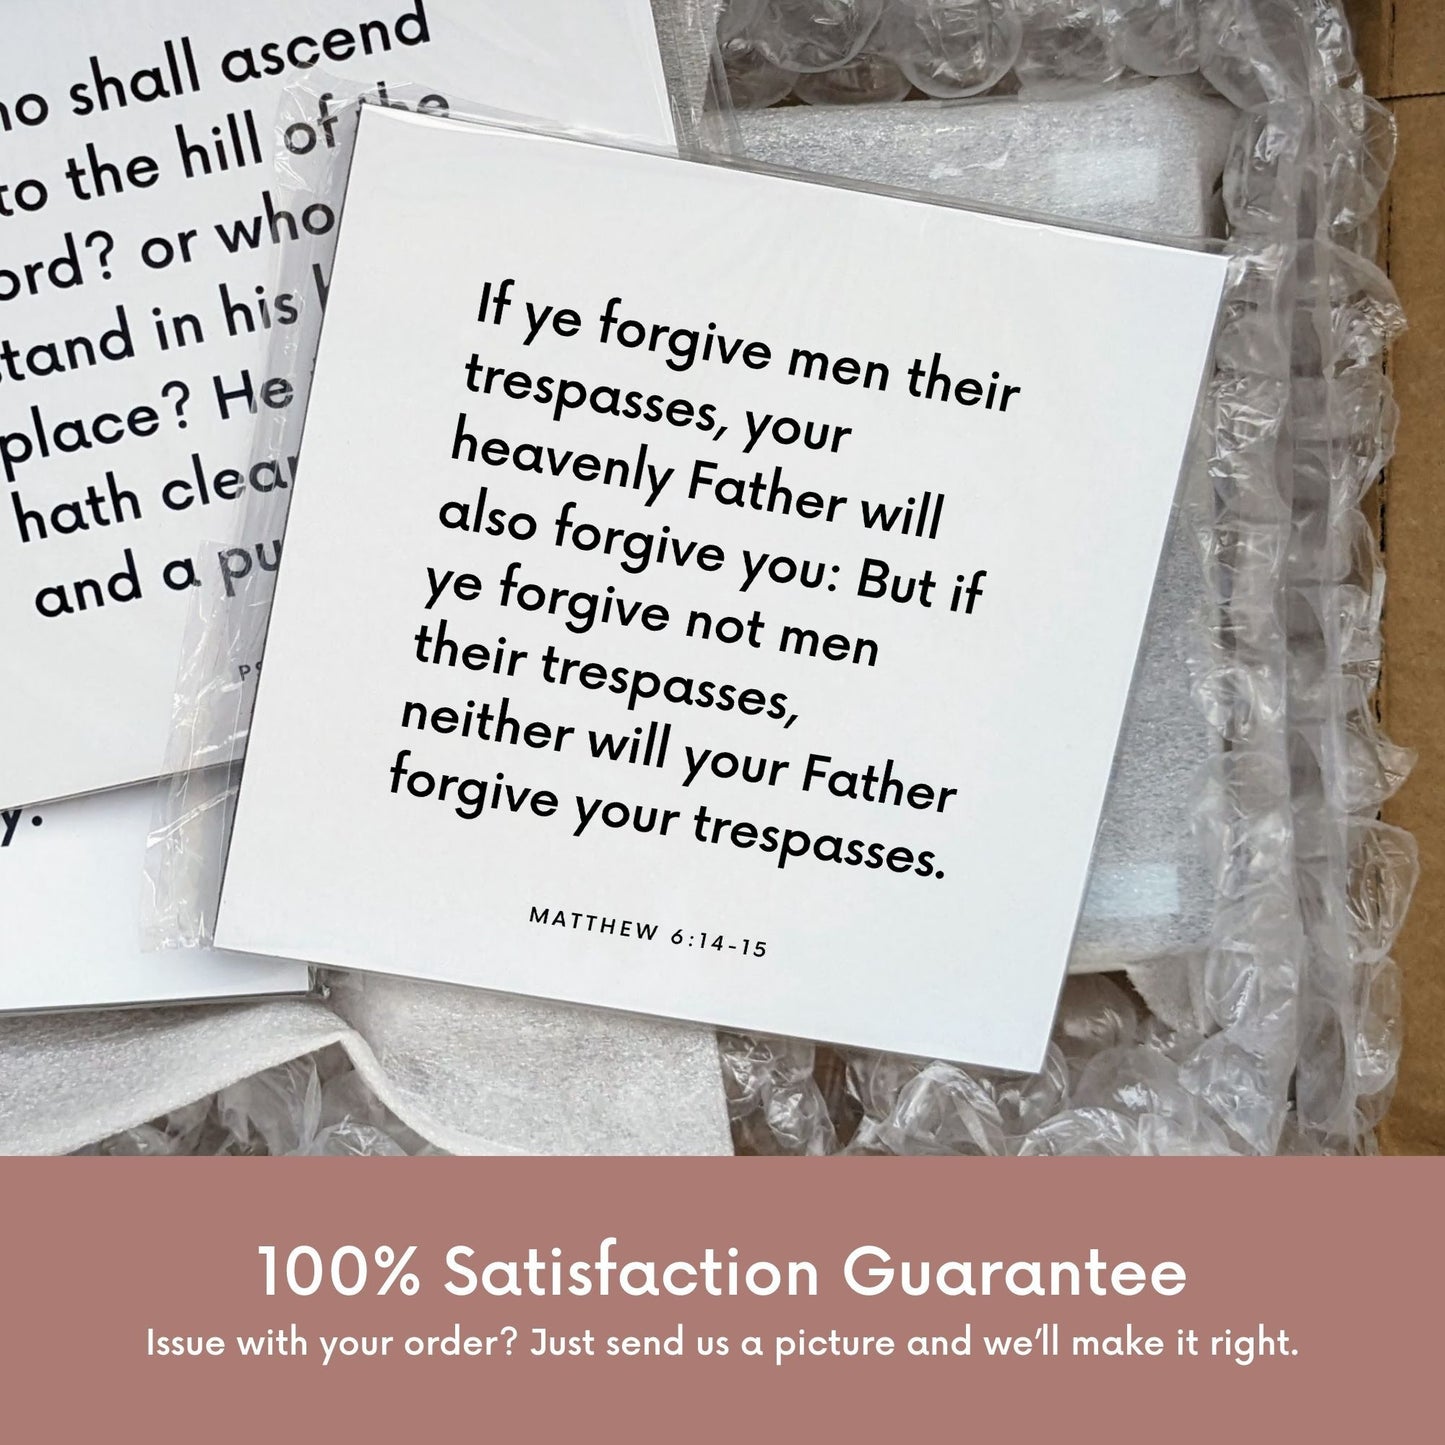 Shipping materials for scripture tile of Matthew 6:14-15 - "If ye forgive men their trespasses"